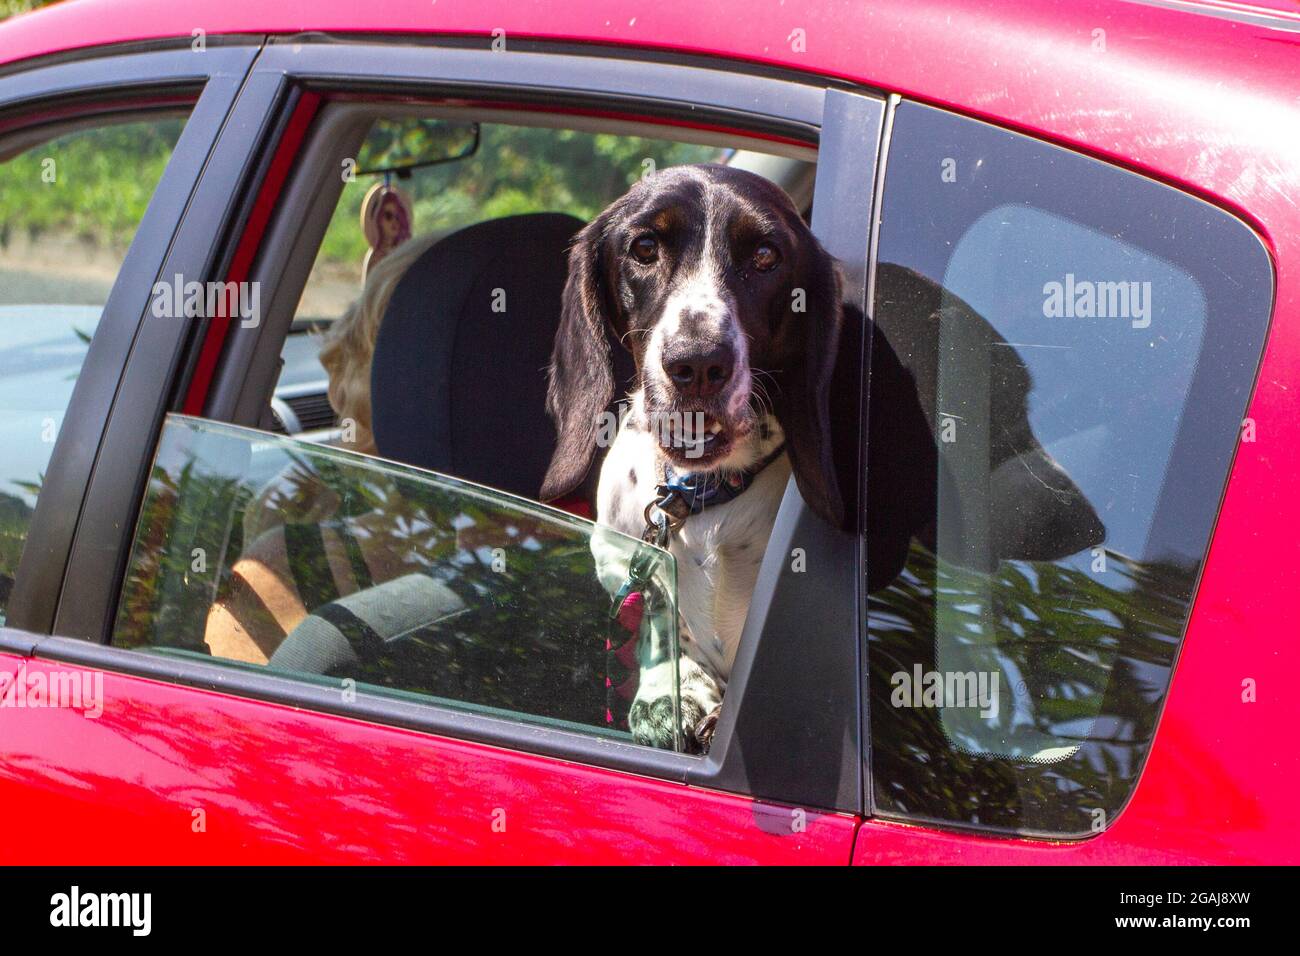 Dogs in cars; Pointing Gundogs are traditionally divided into three classes: retrievers, flushing dogs, and pointing breeds. Black & tan spotted dog looking out of car window, UK Stock Photo